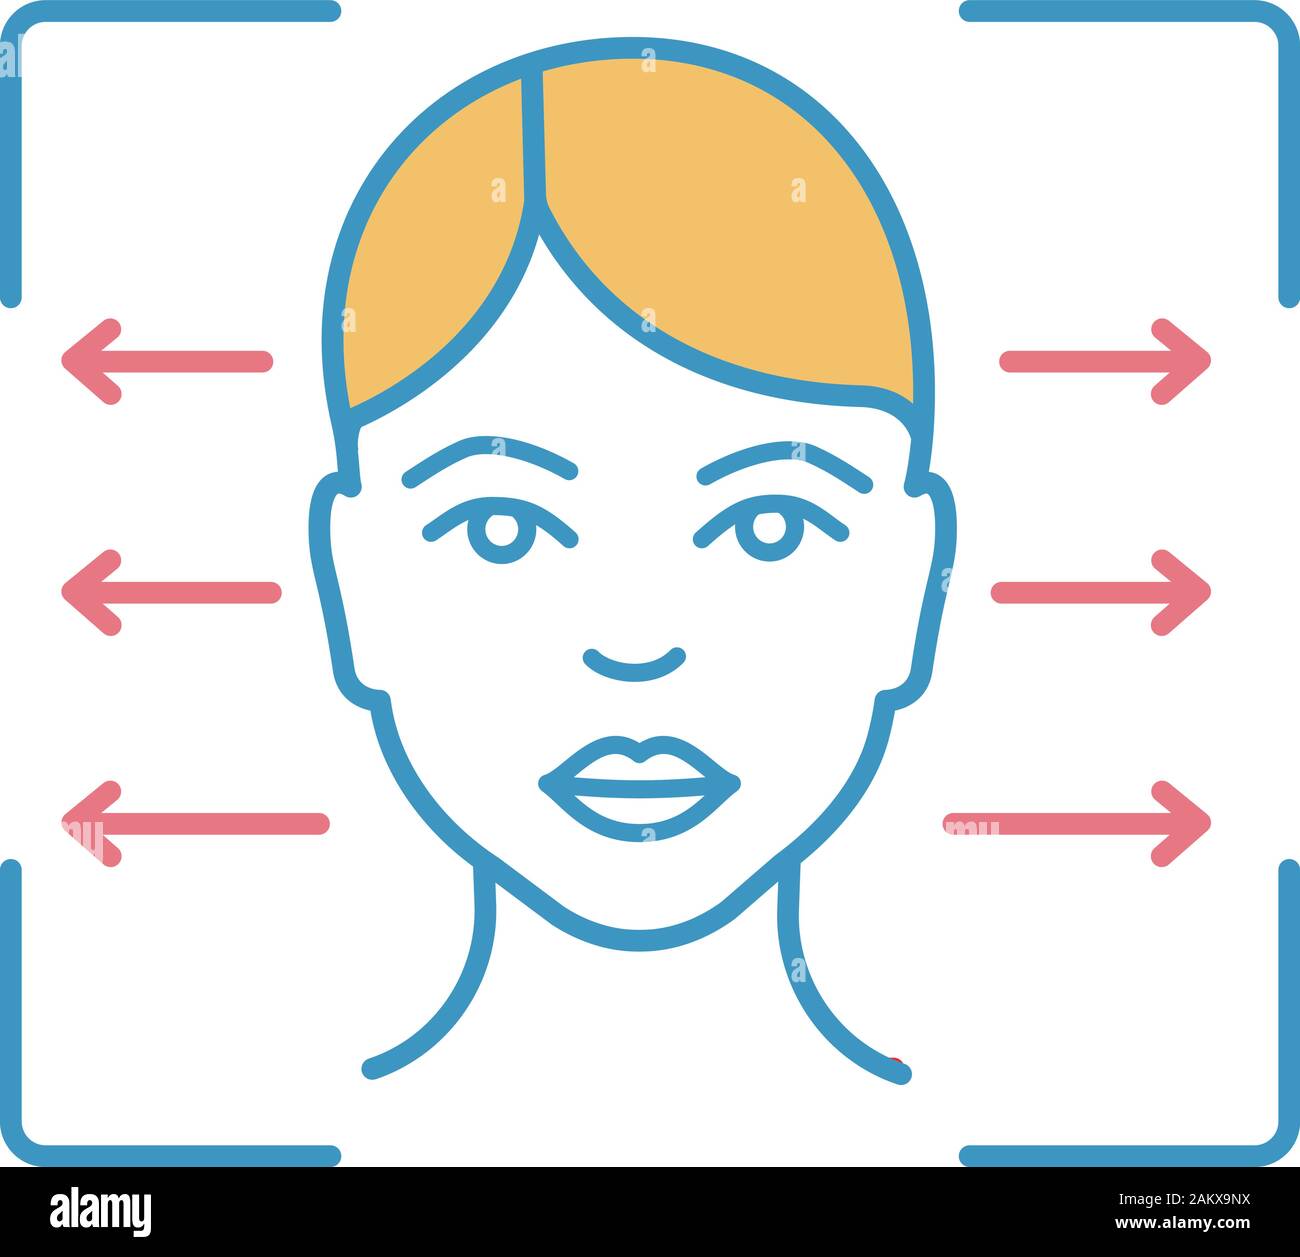 Facial recognition reader color icon. Face ID scanning alignment. Human head. Identity verification adjustment. Isolated vector illustration Stock Vector